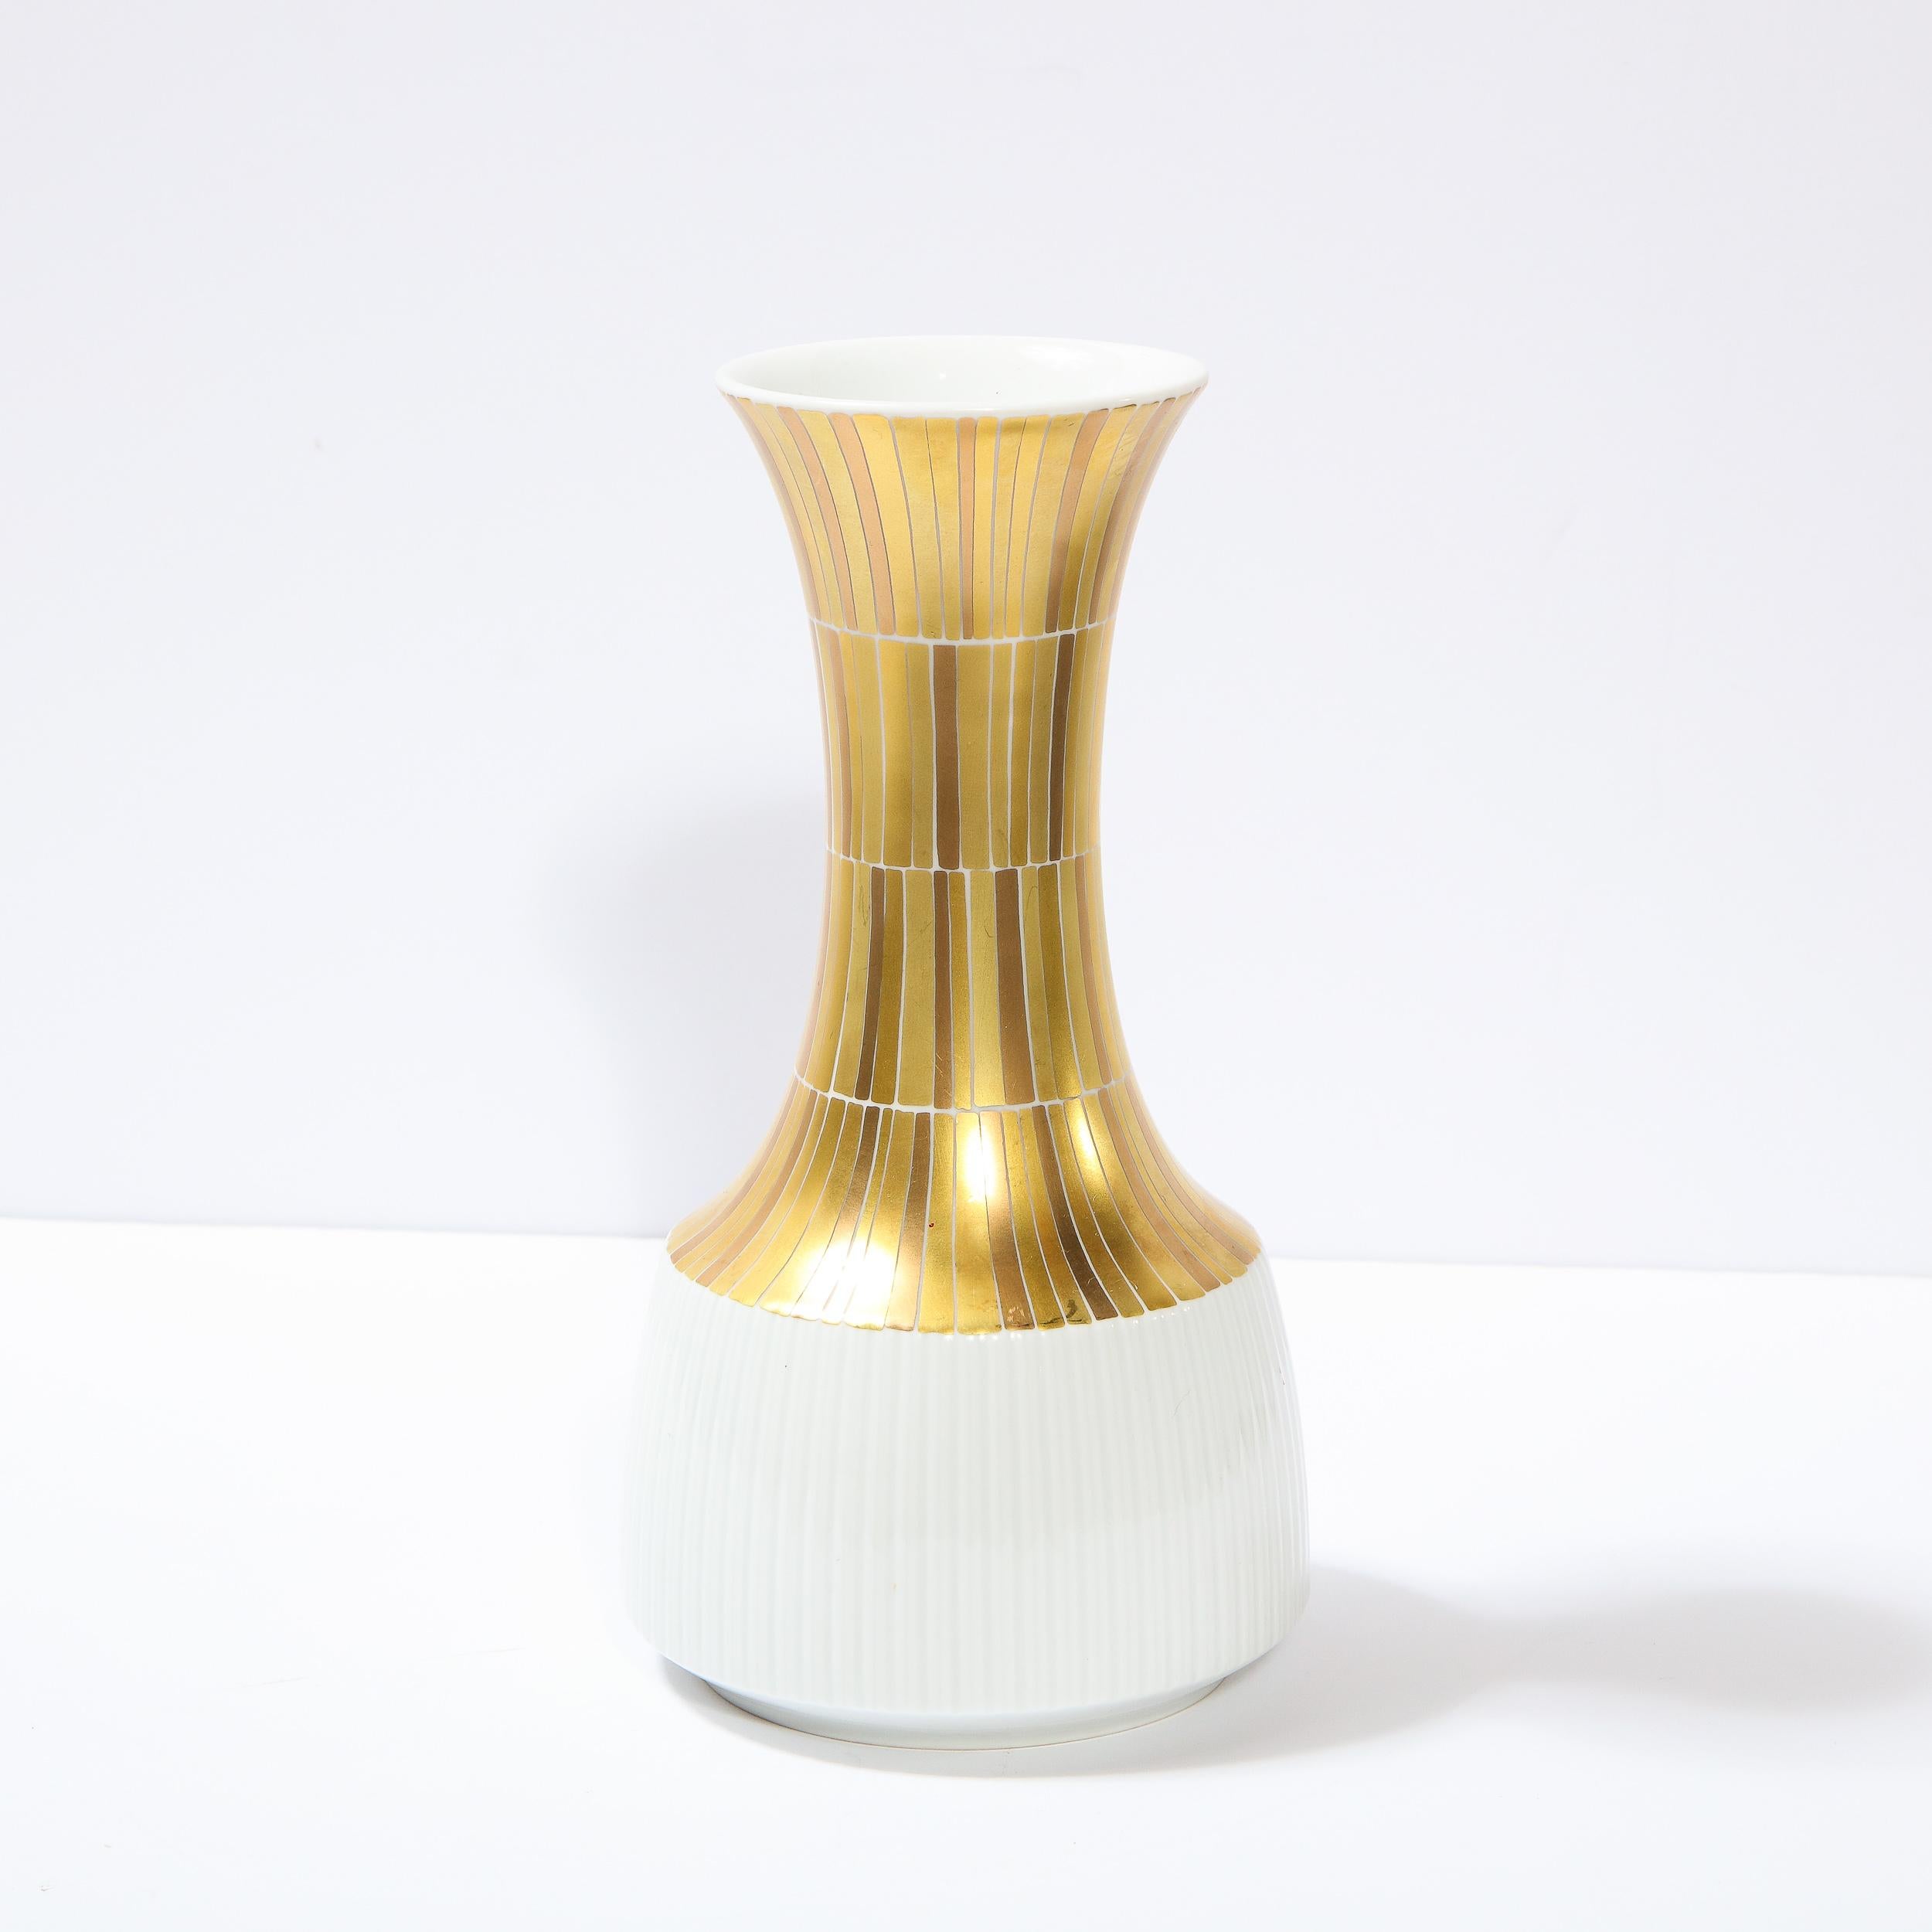 20th Century Signed Modernist Hourglass Form Porcelain Vase by Tapio Wirkkala for Rosenthal